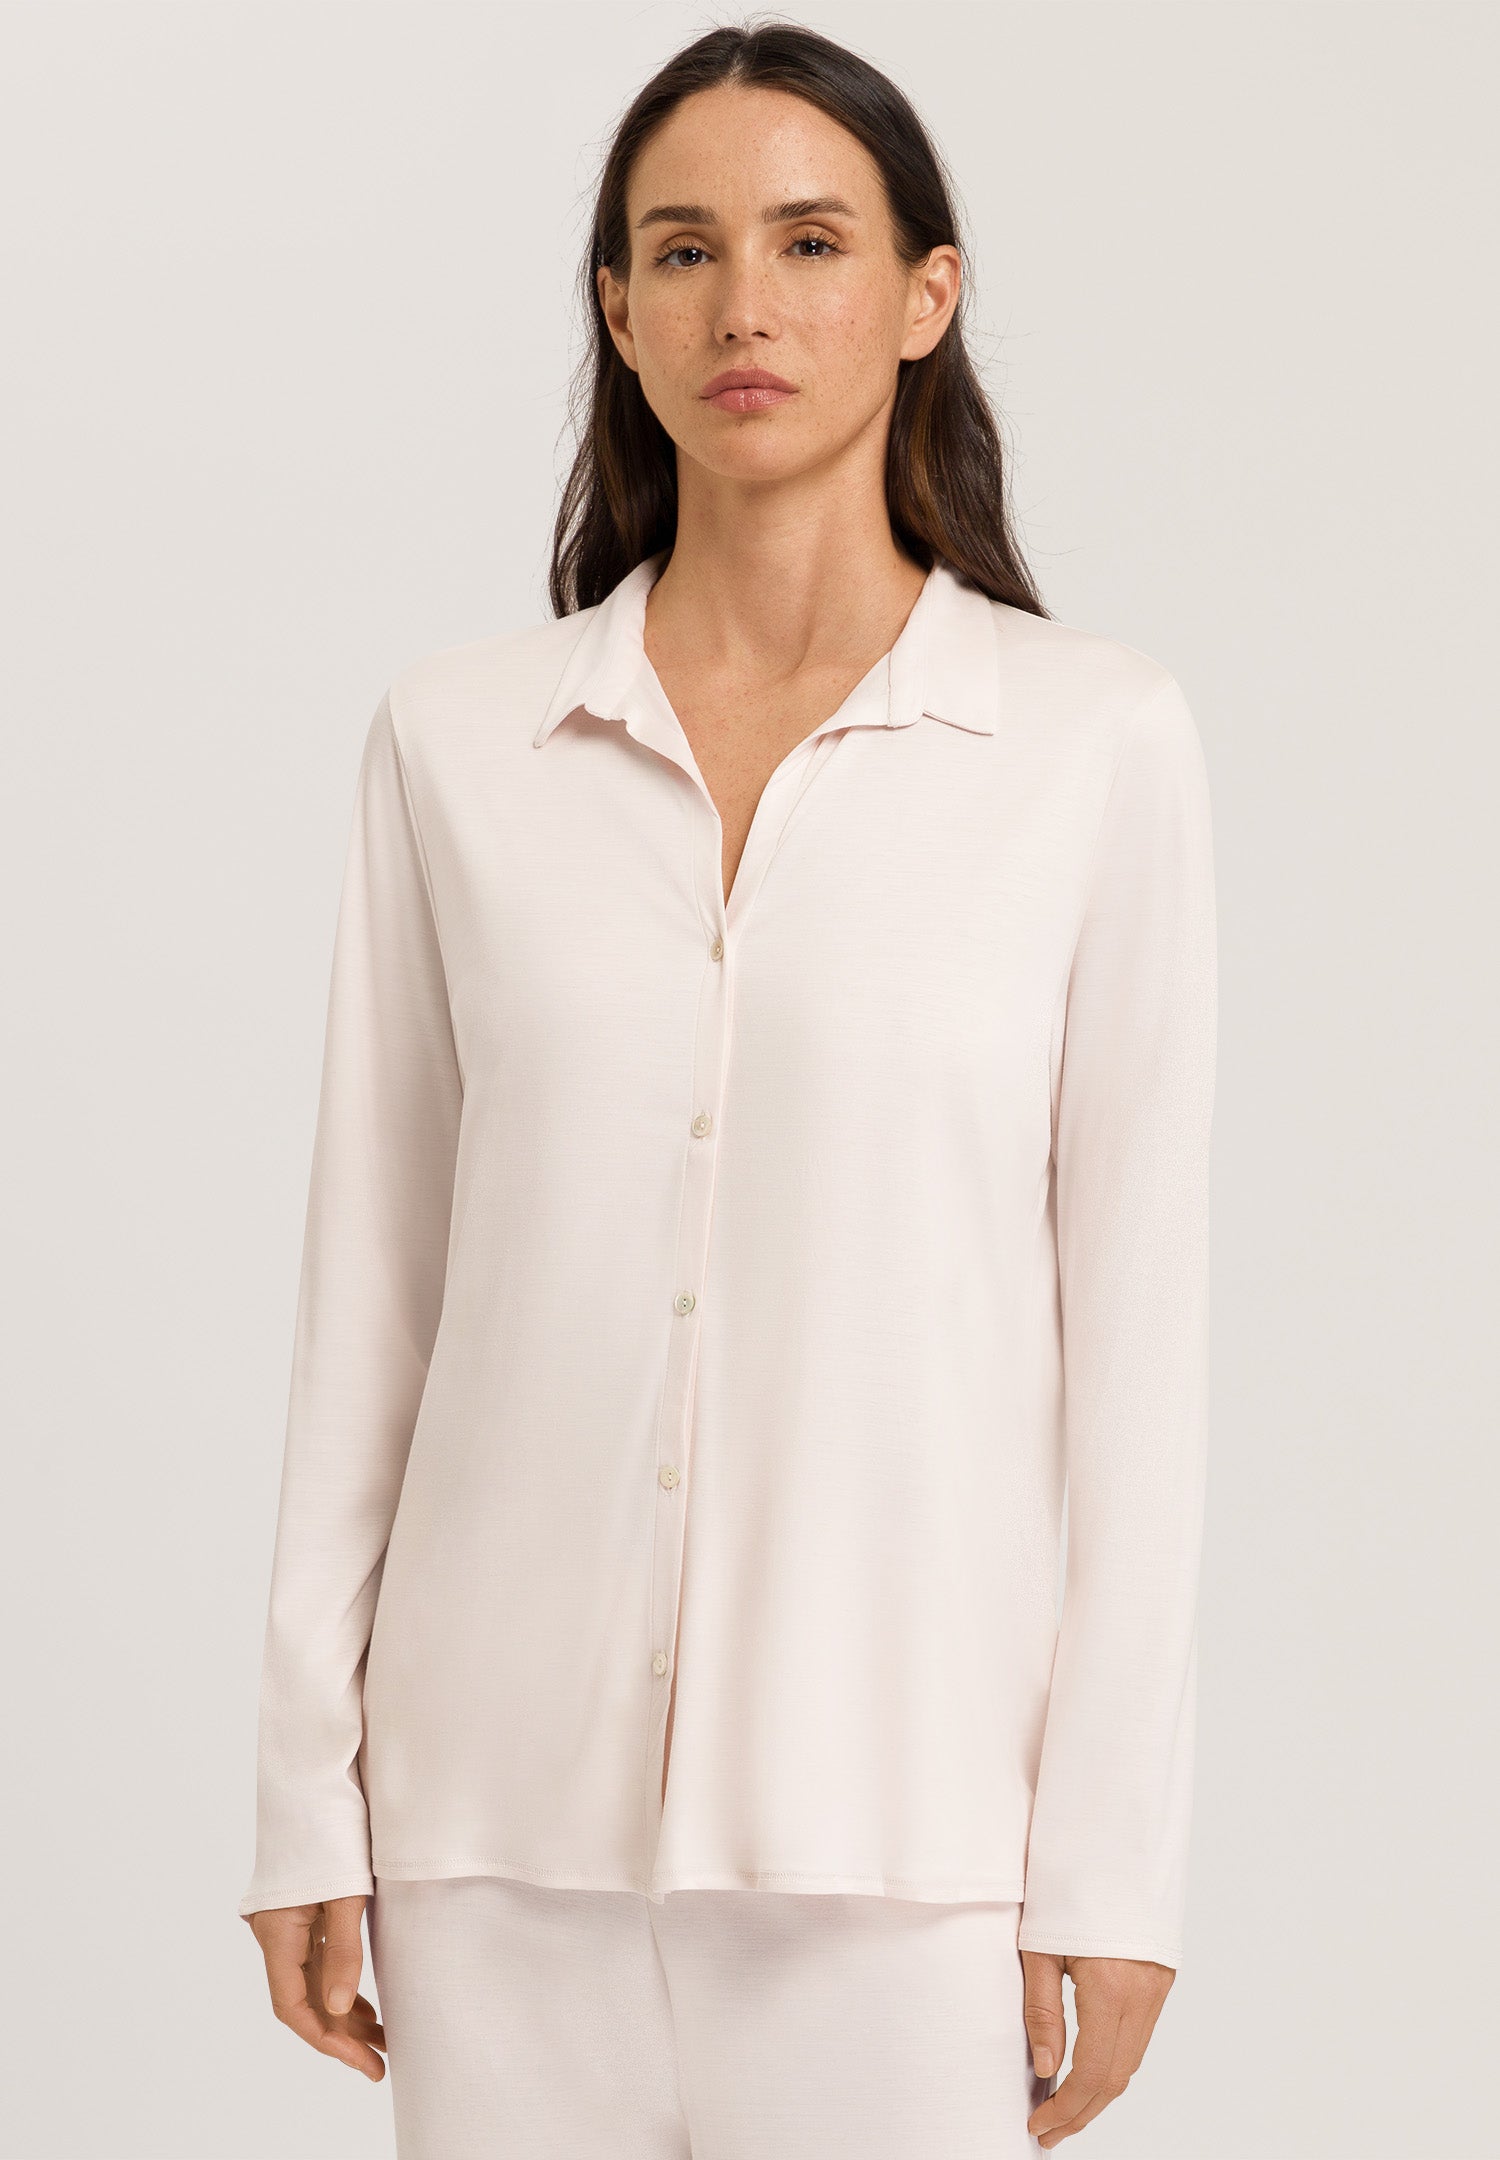 77305 Grand Central L/Slv Button Front Shirt - 1233 Moonlight